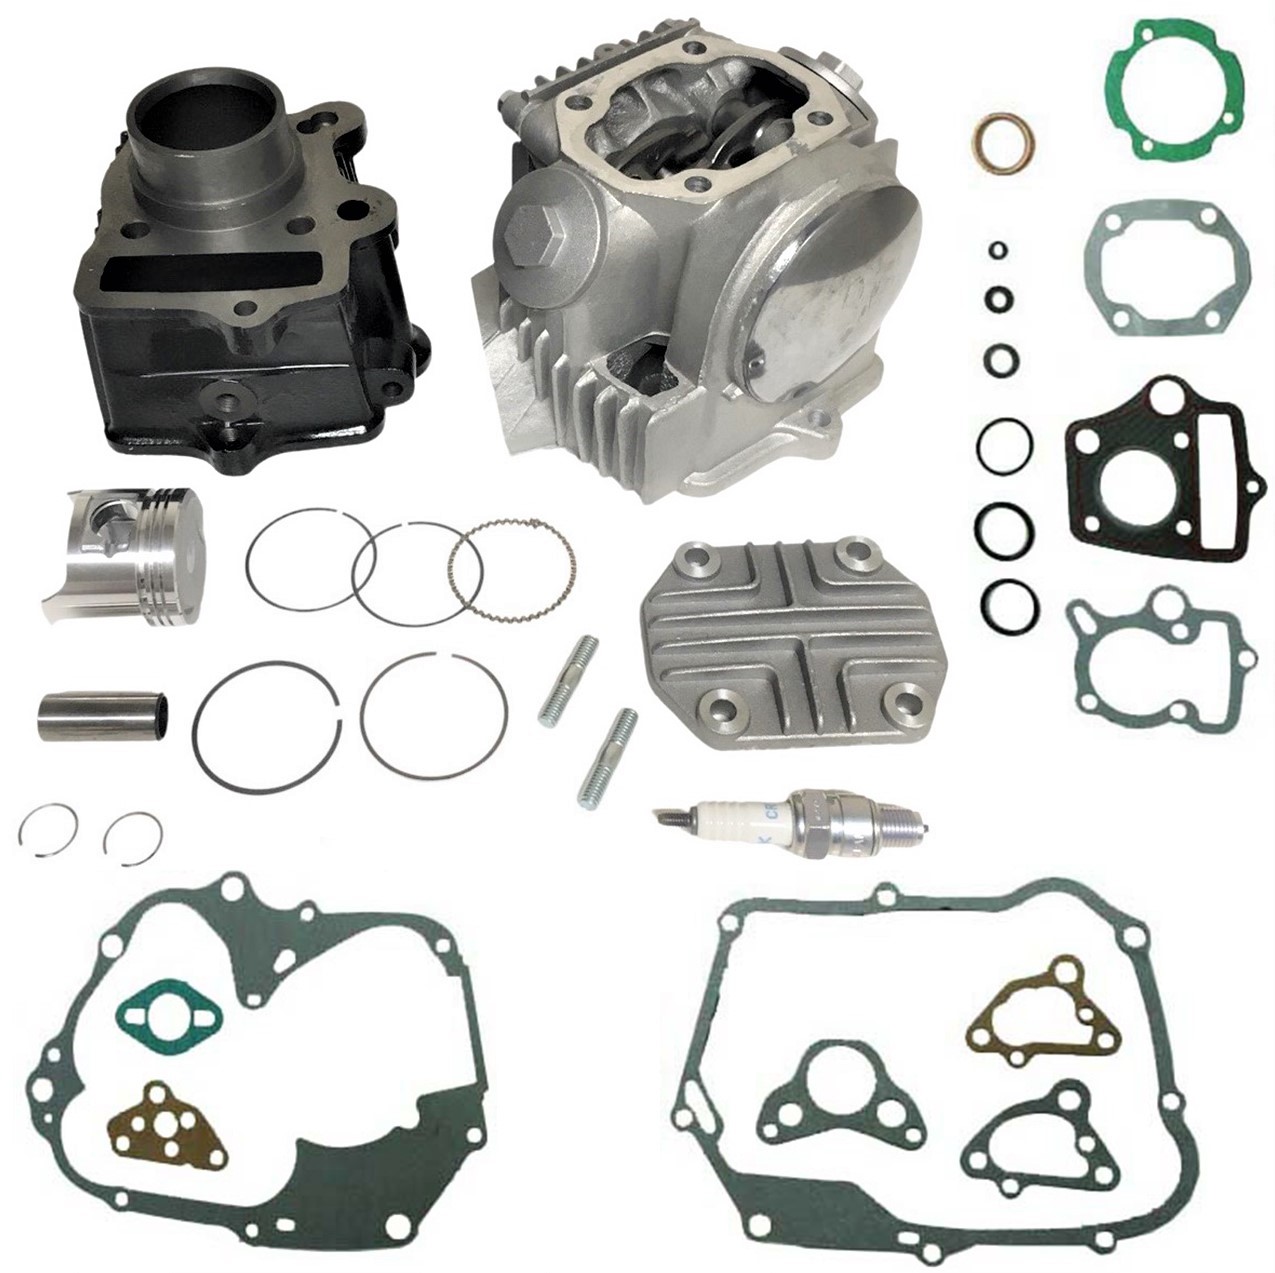 Cylinder & Head kit 70cc Chinese ATVs and Dirtbikes